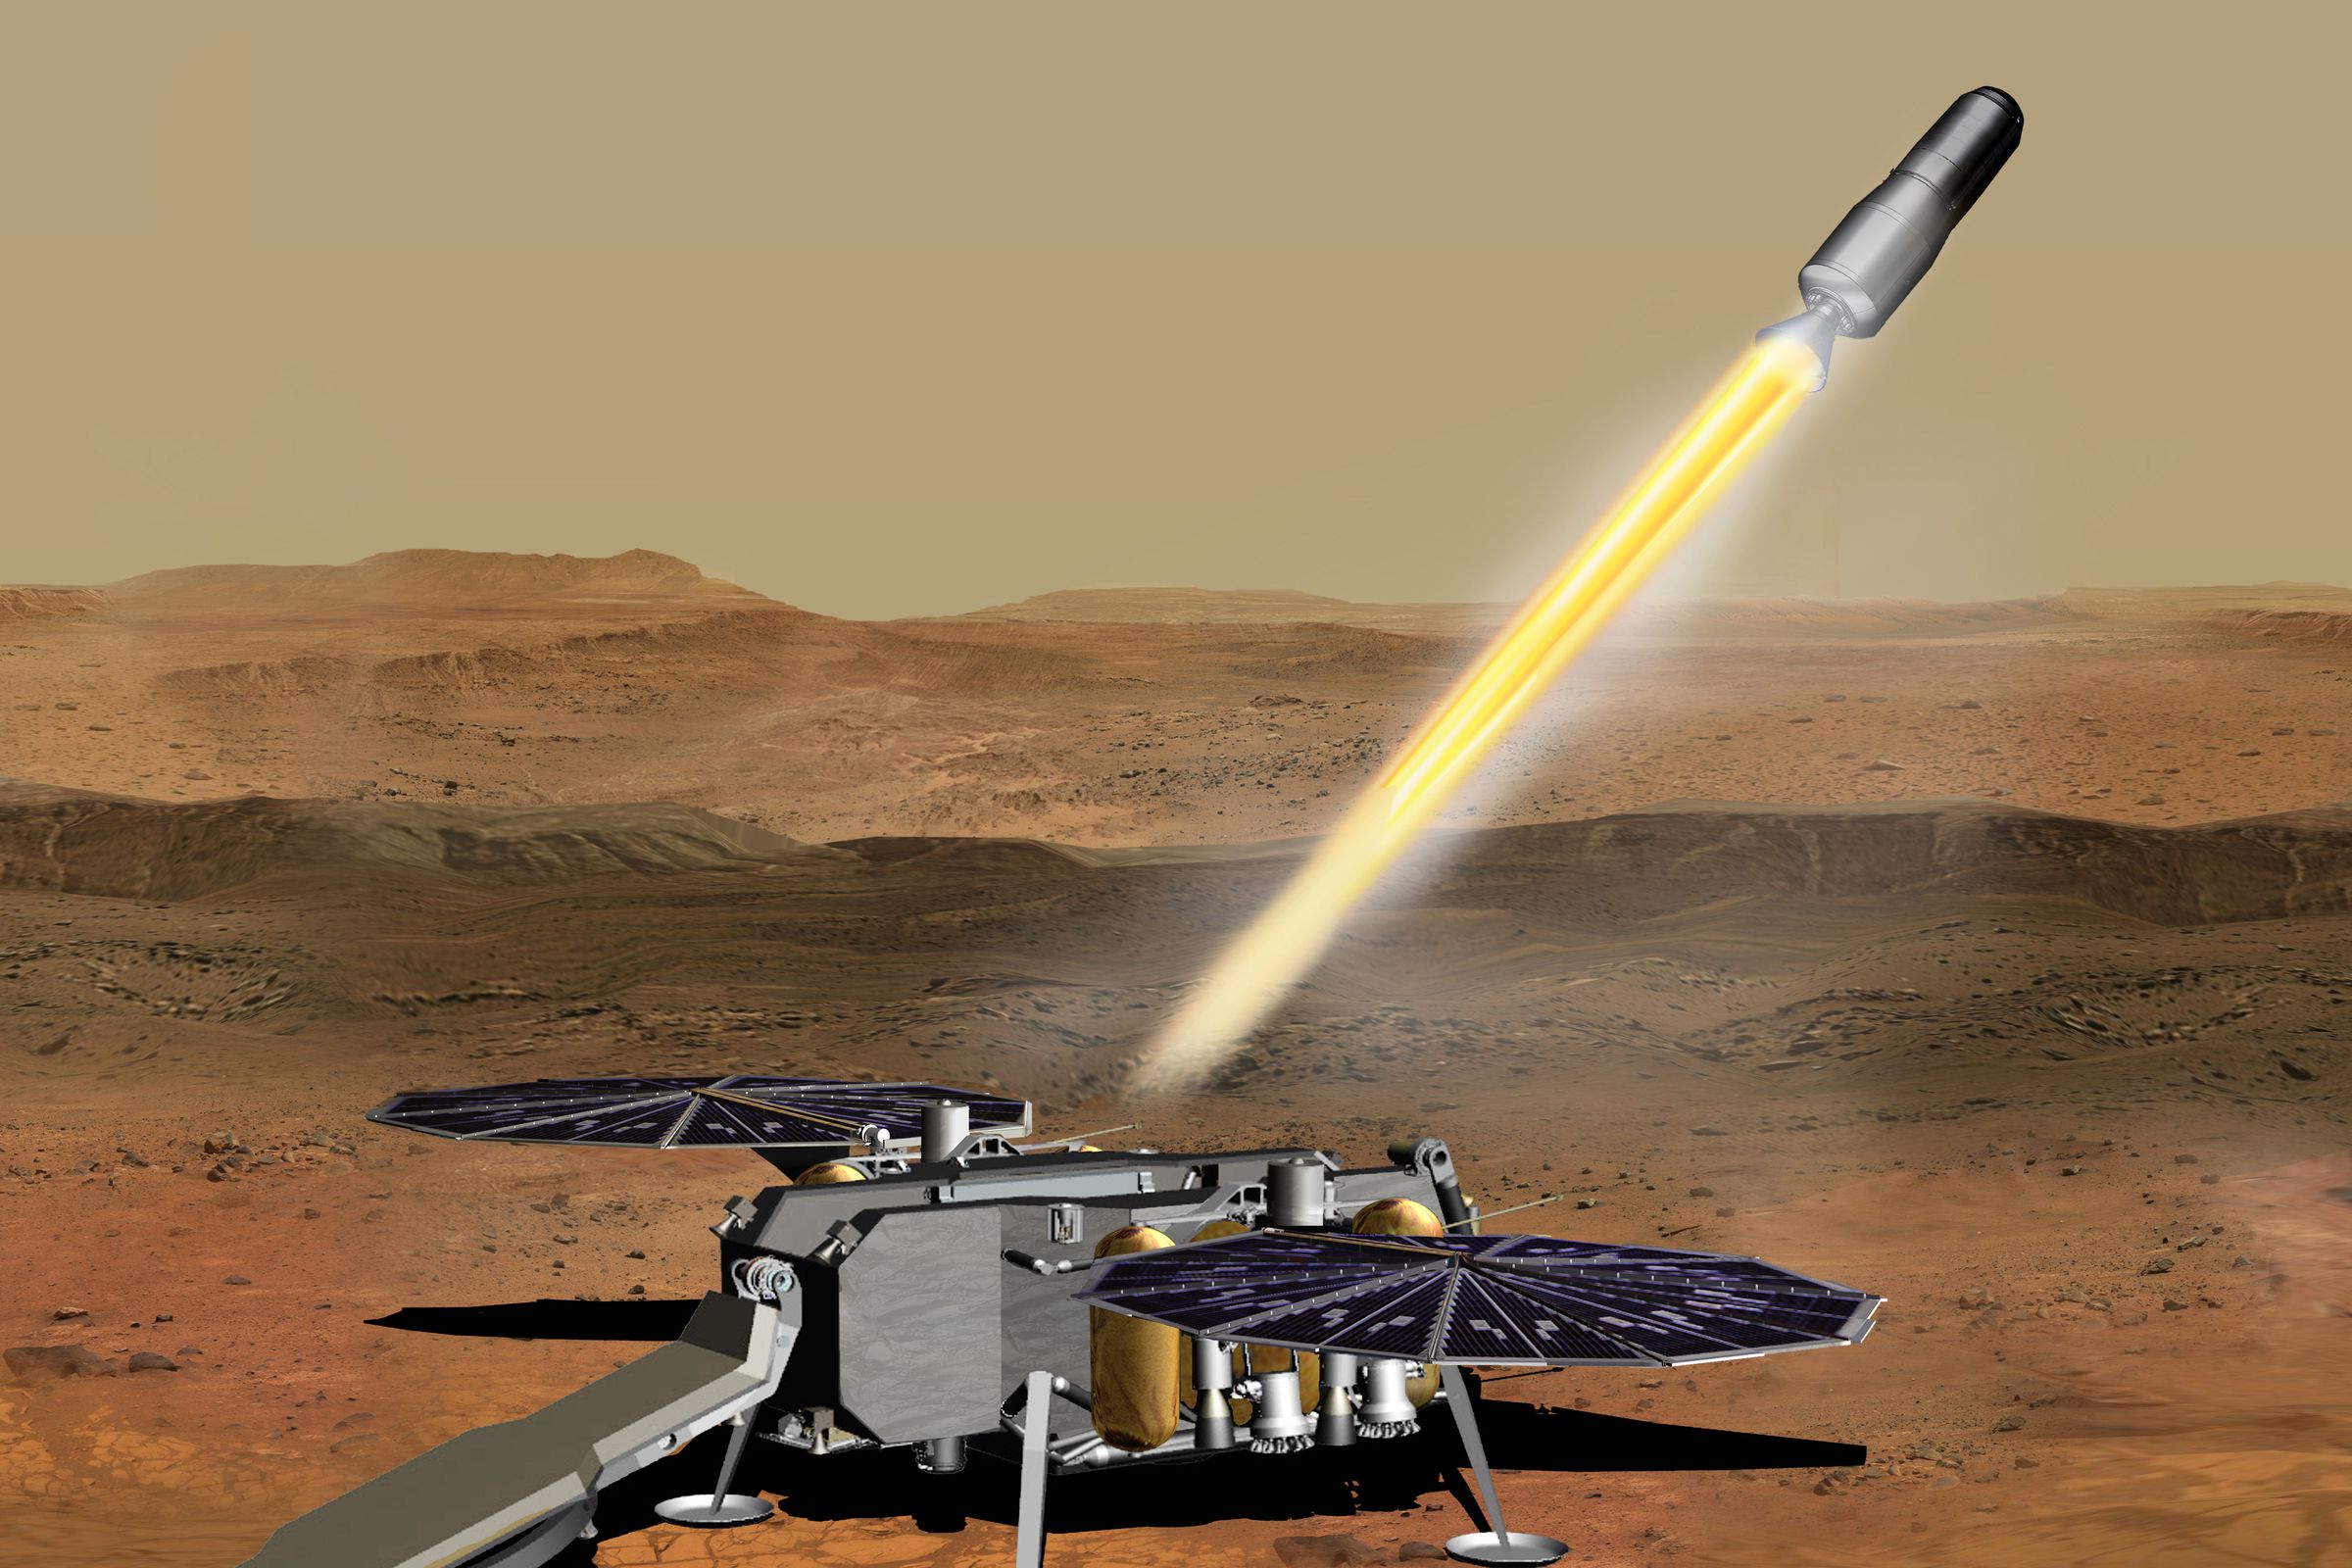 An artistic rendering of what the MAV could look like launching from Mars